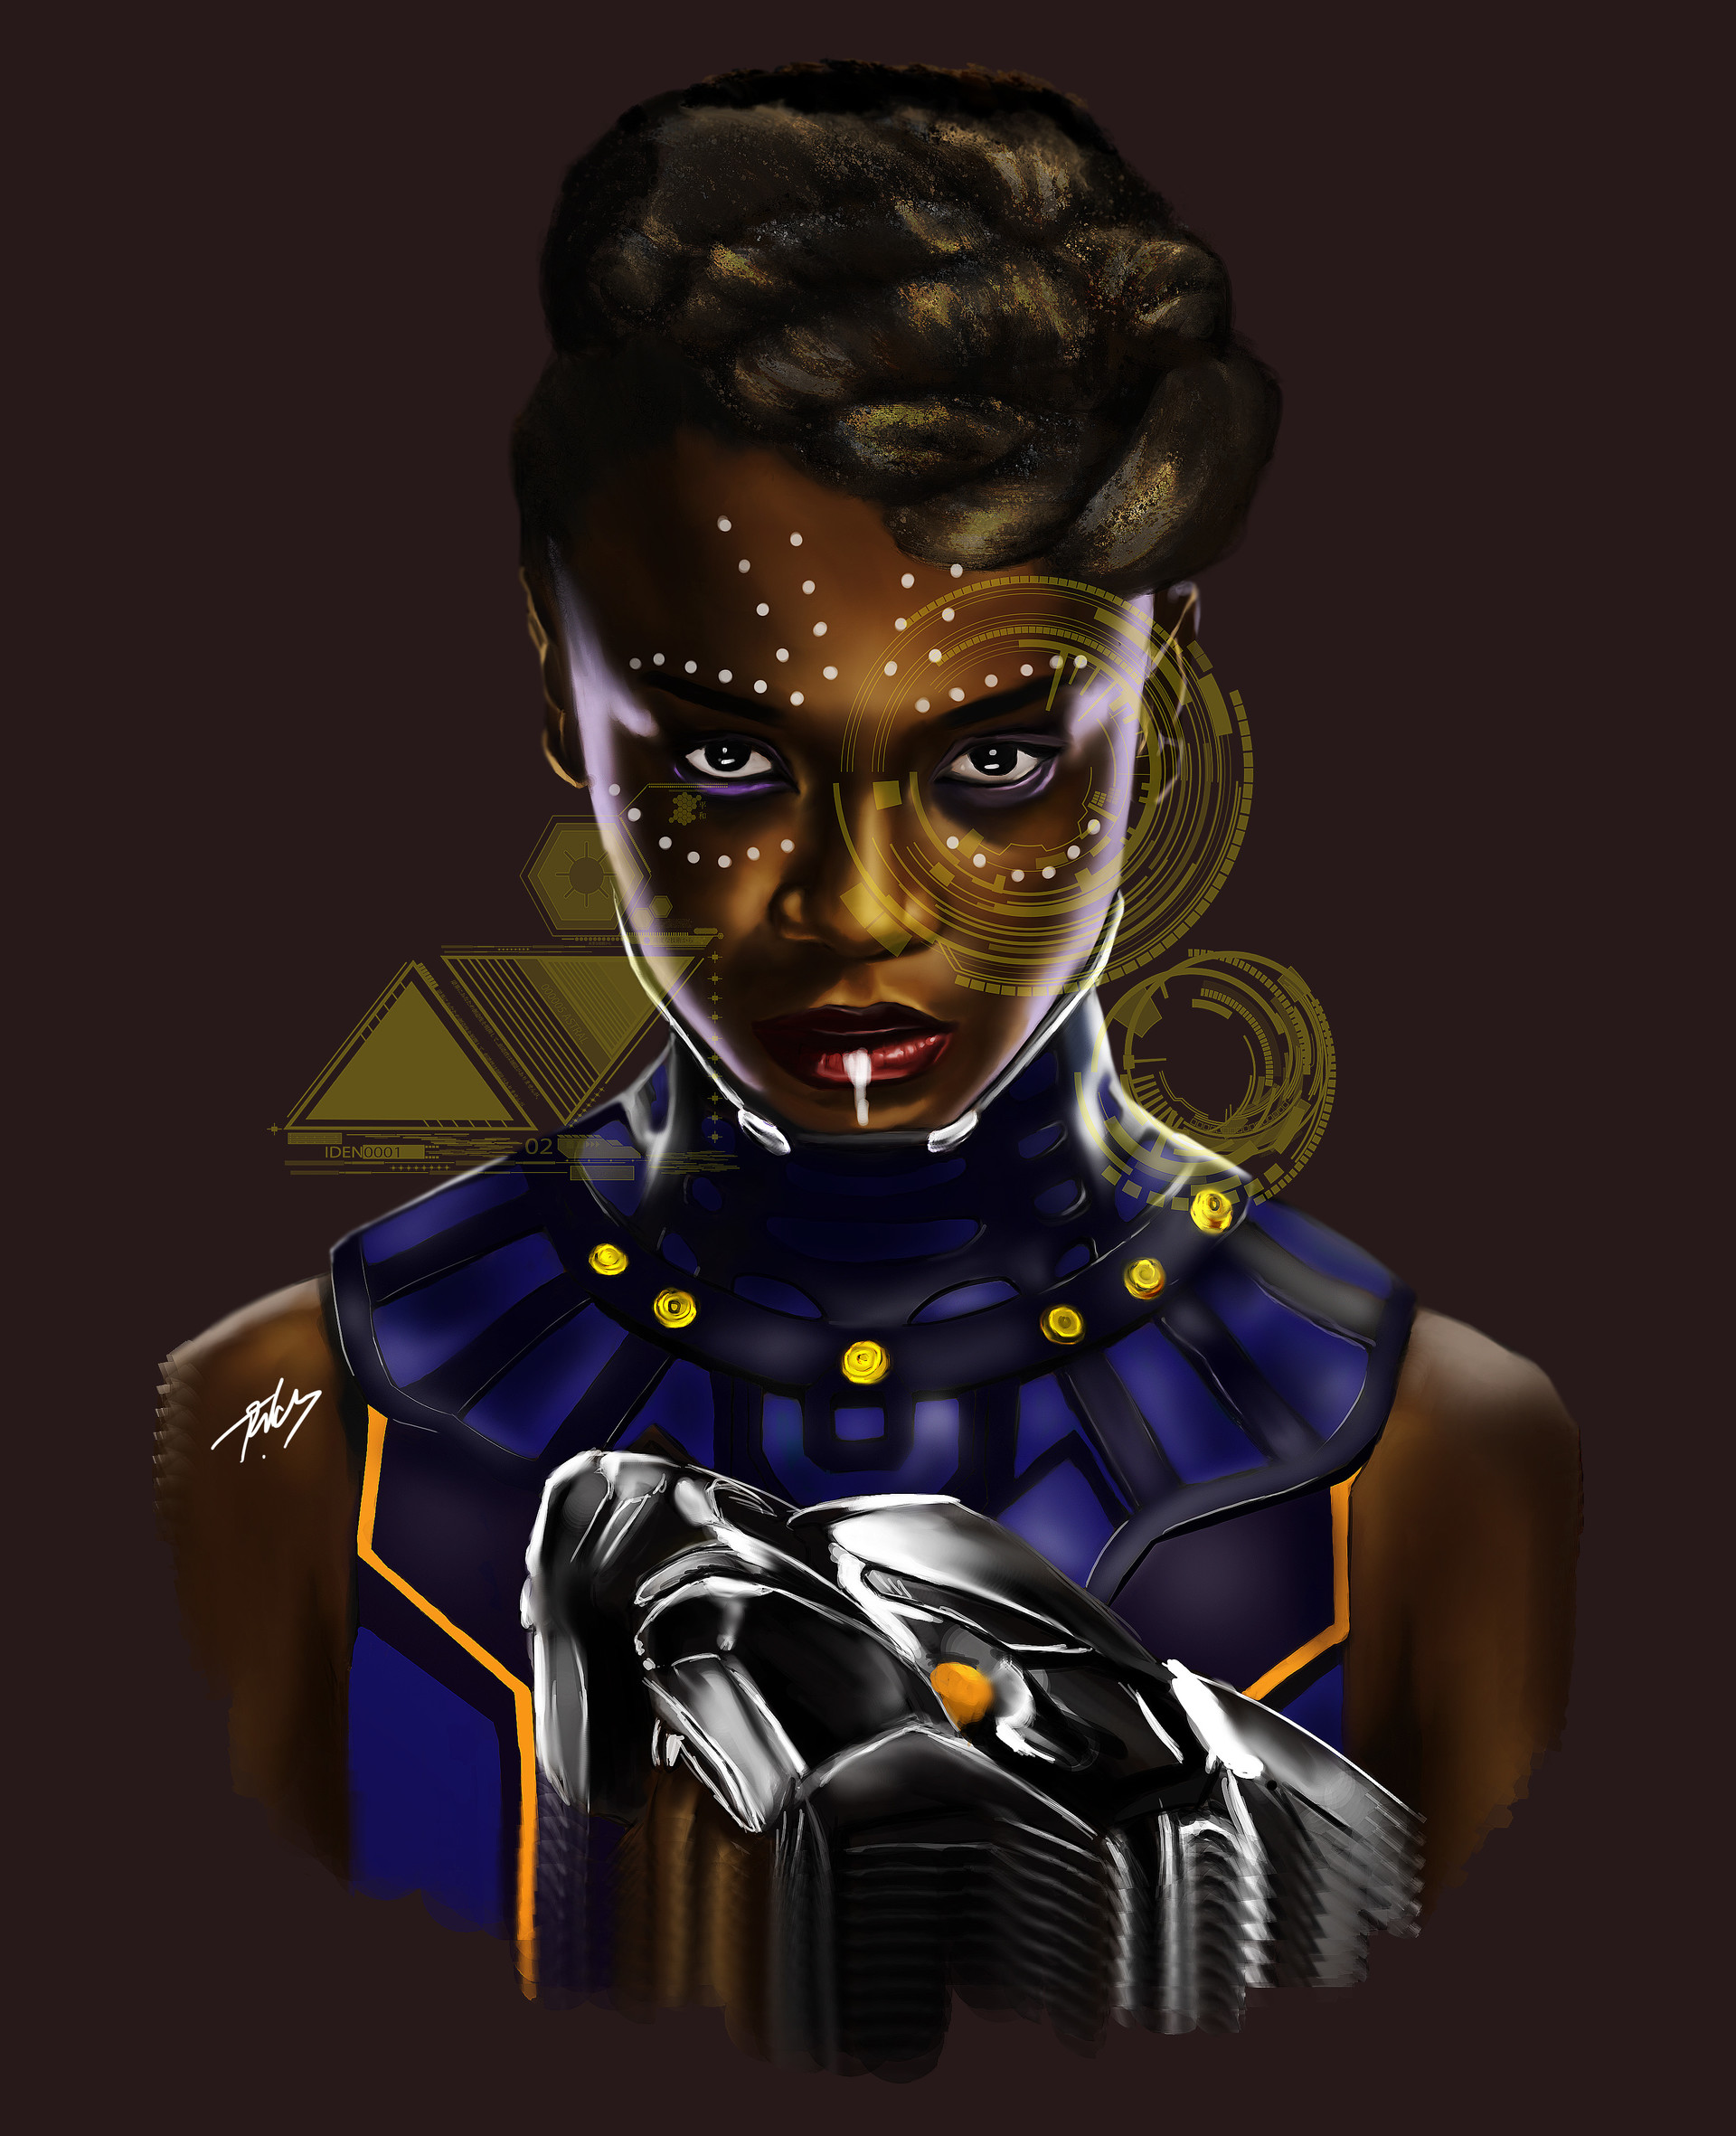 Fan Art i made of Shuri from Black Panther. 